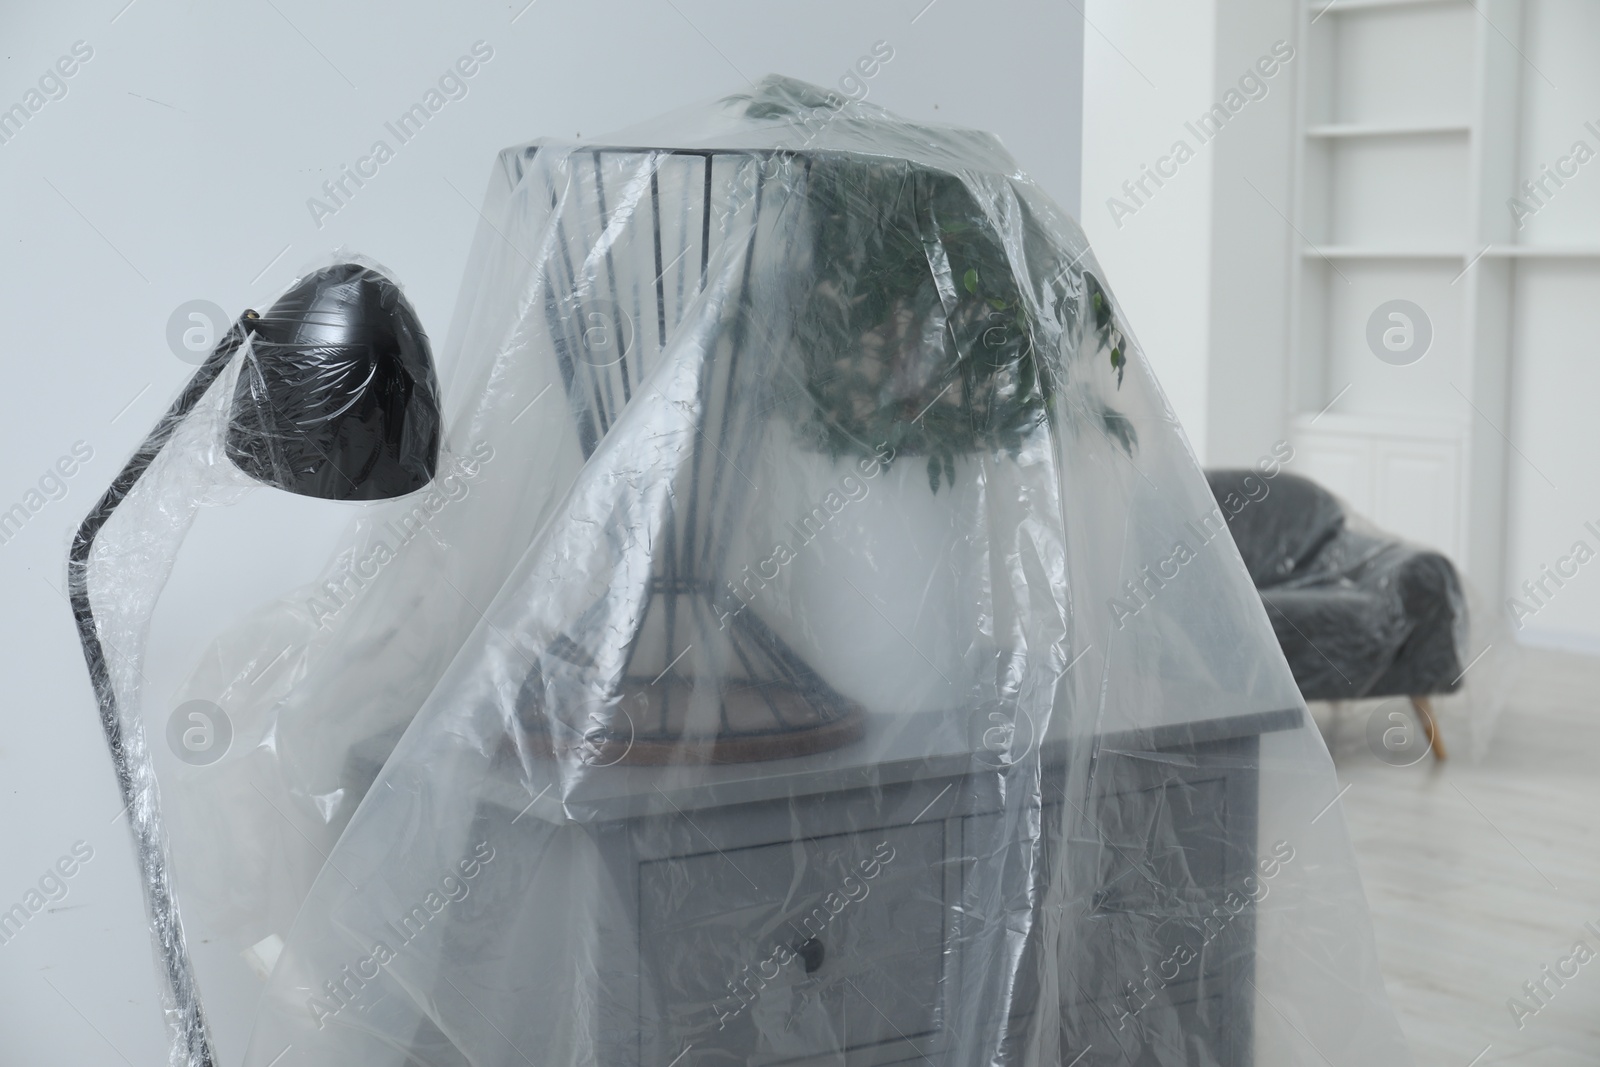 Photo of Modern furniture, houseplant covered with plastic film and boxes at home